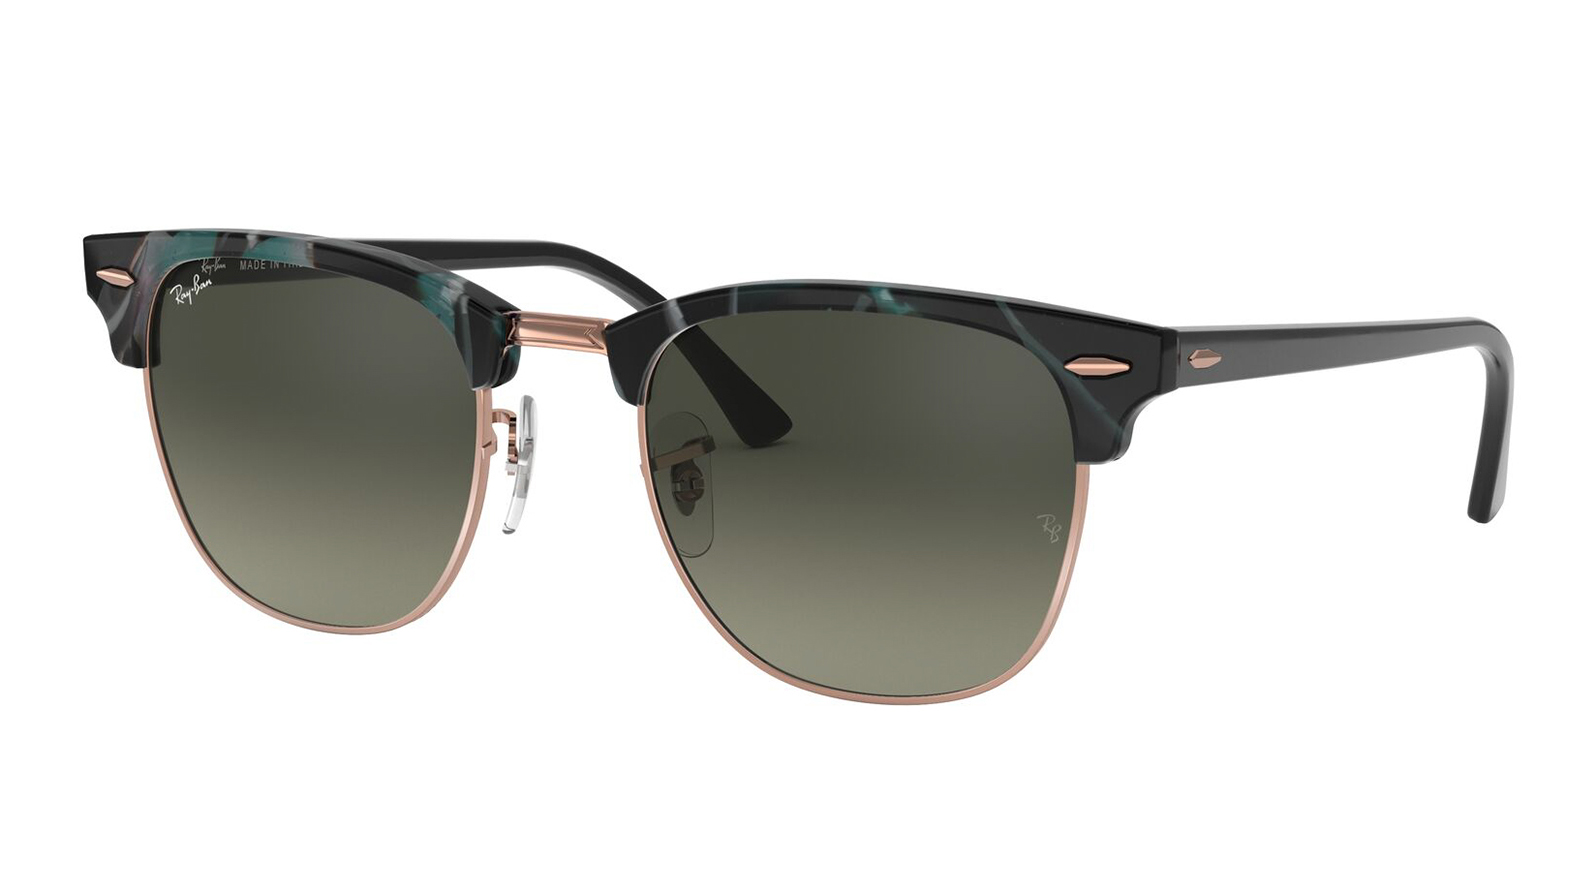 Ray-Ban Clubmaster RB 3016 125571 ray ban clubmaster rx 5154 2372